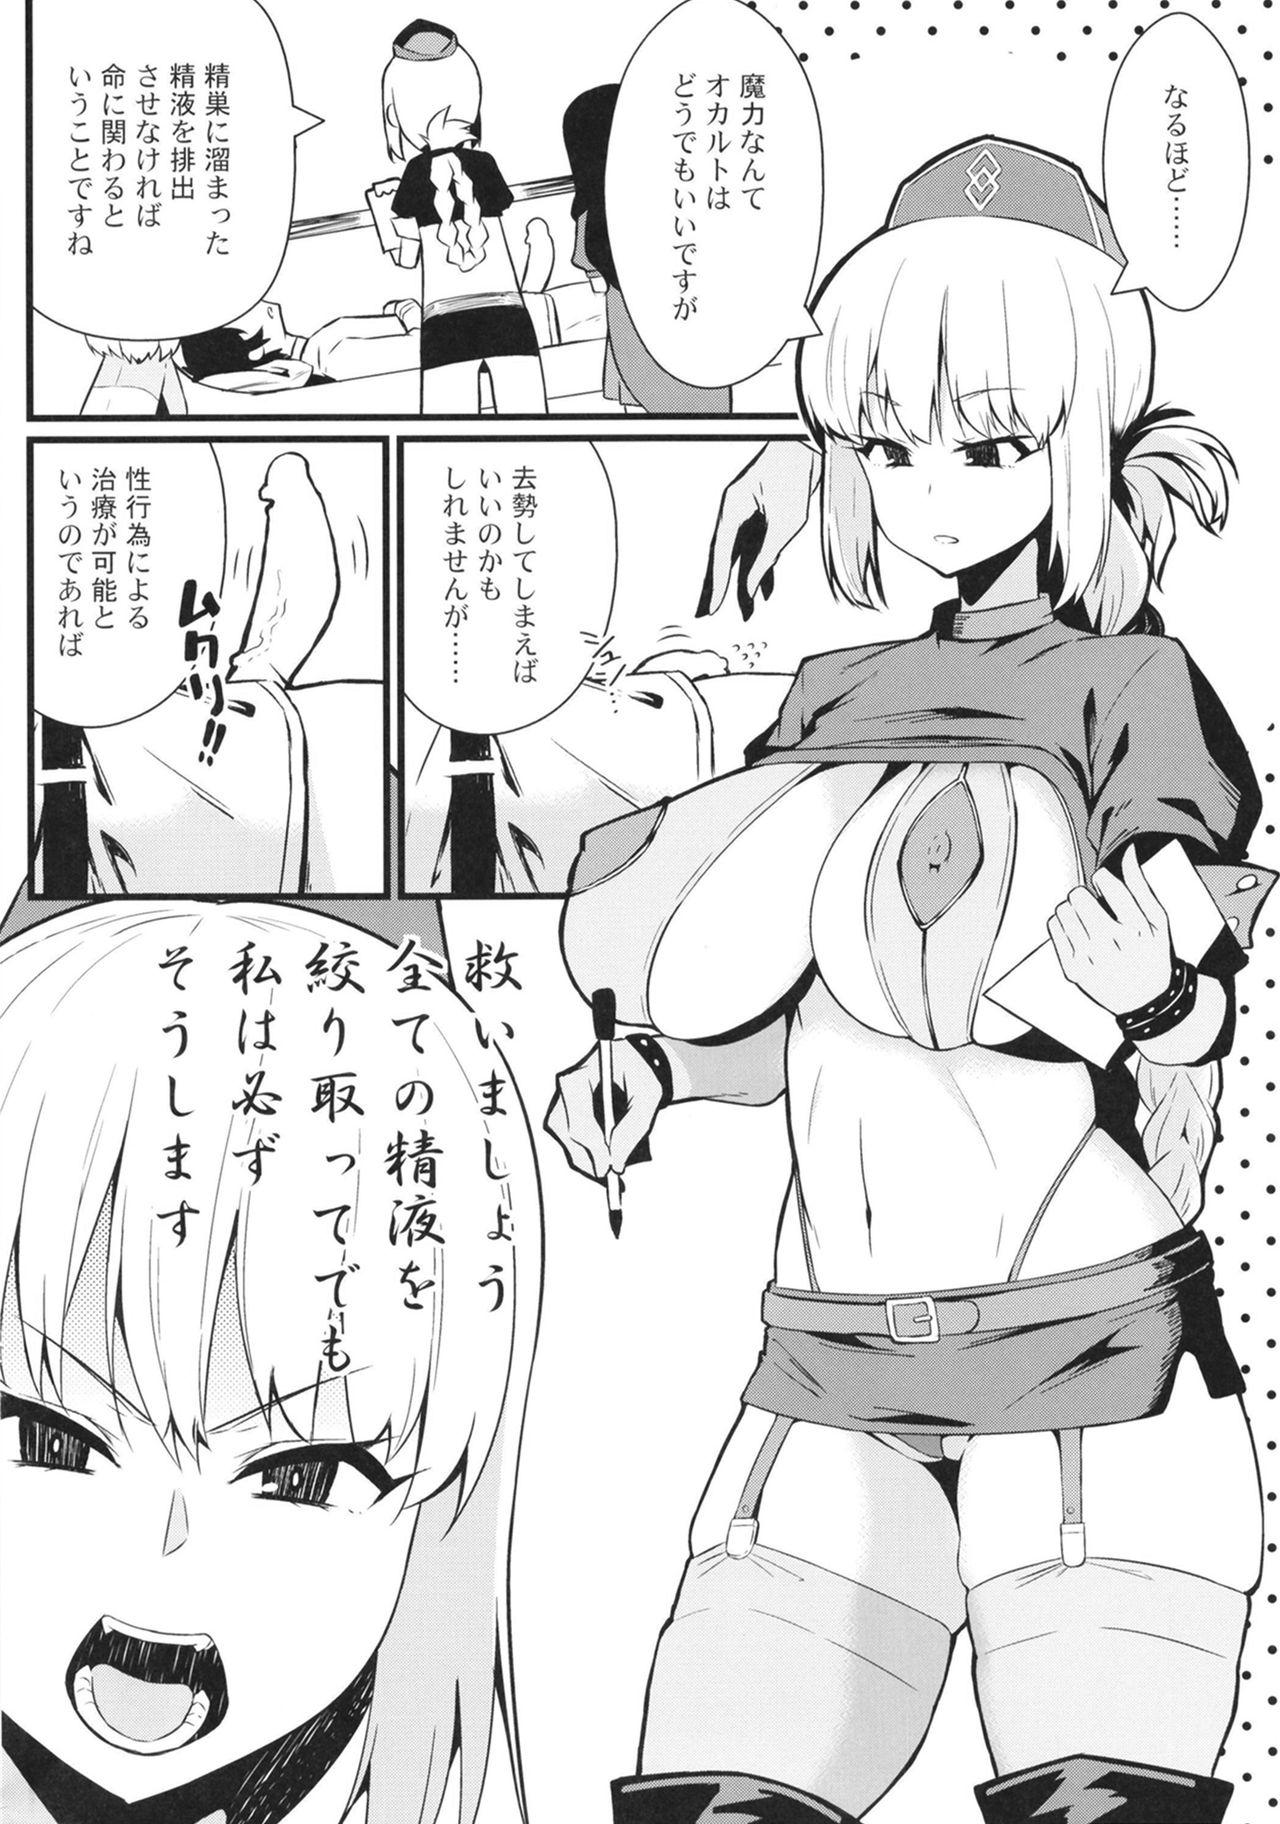 Jeans Master Bousou - Fate grand order Stud - Page 4